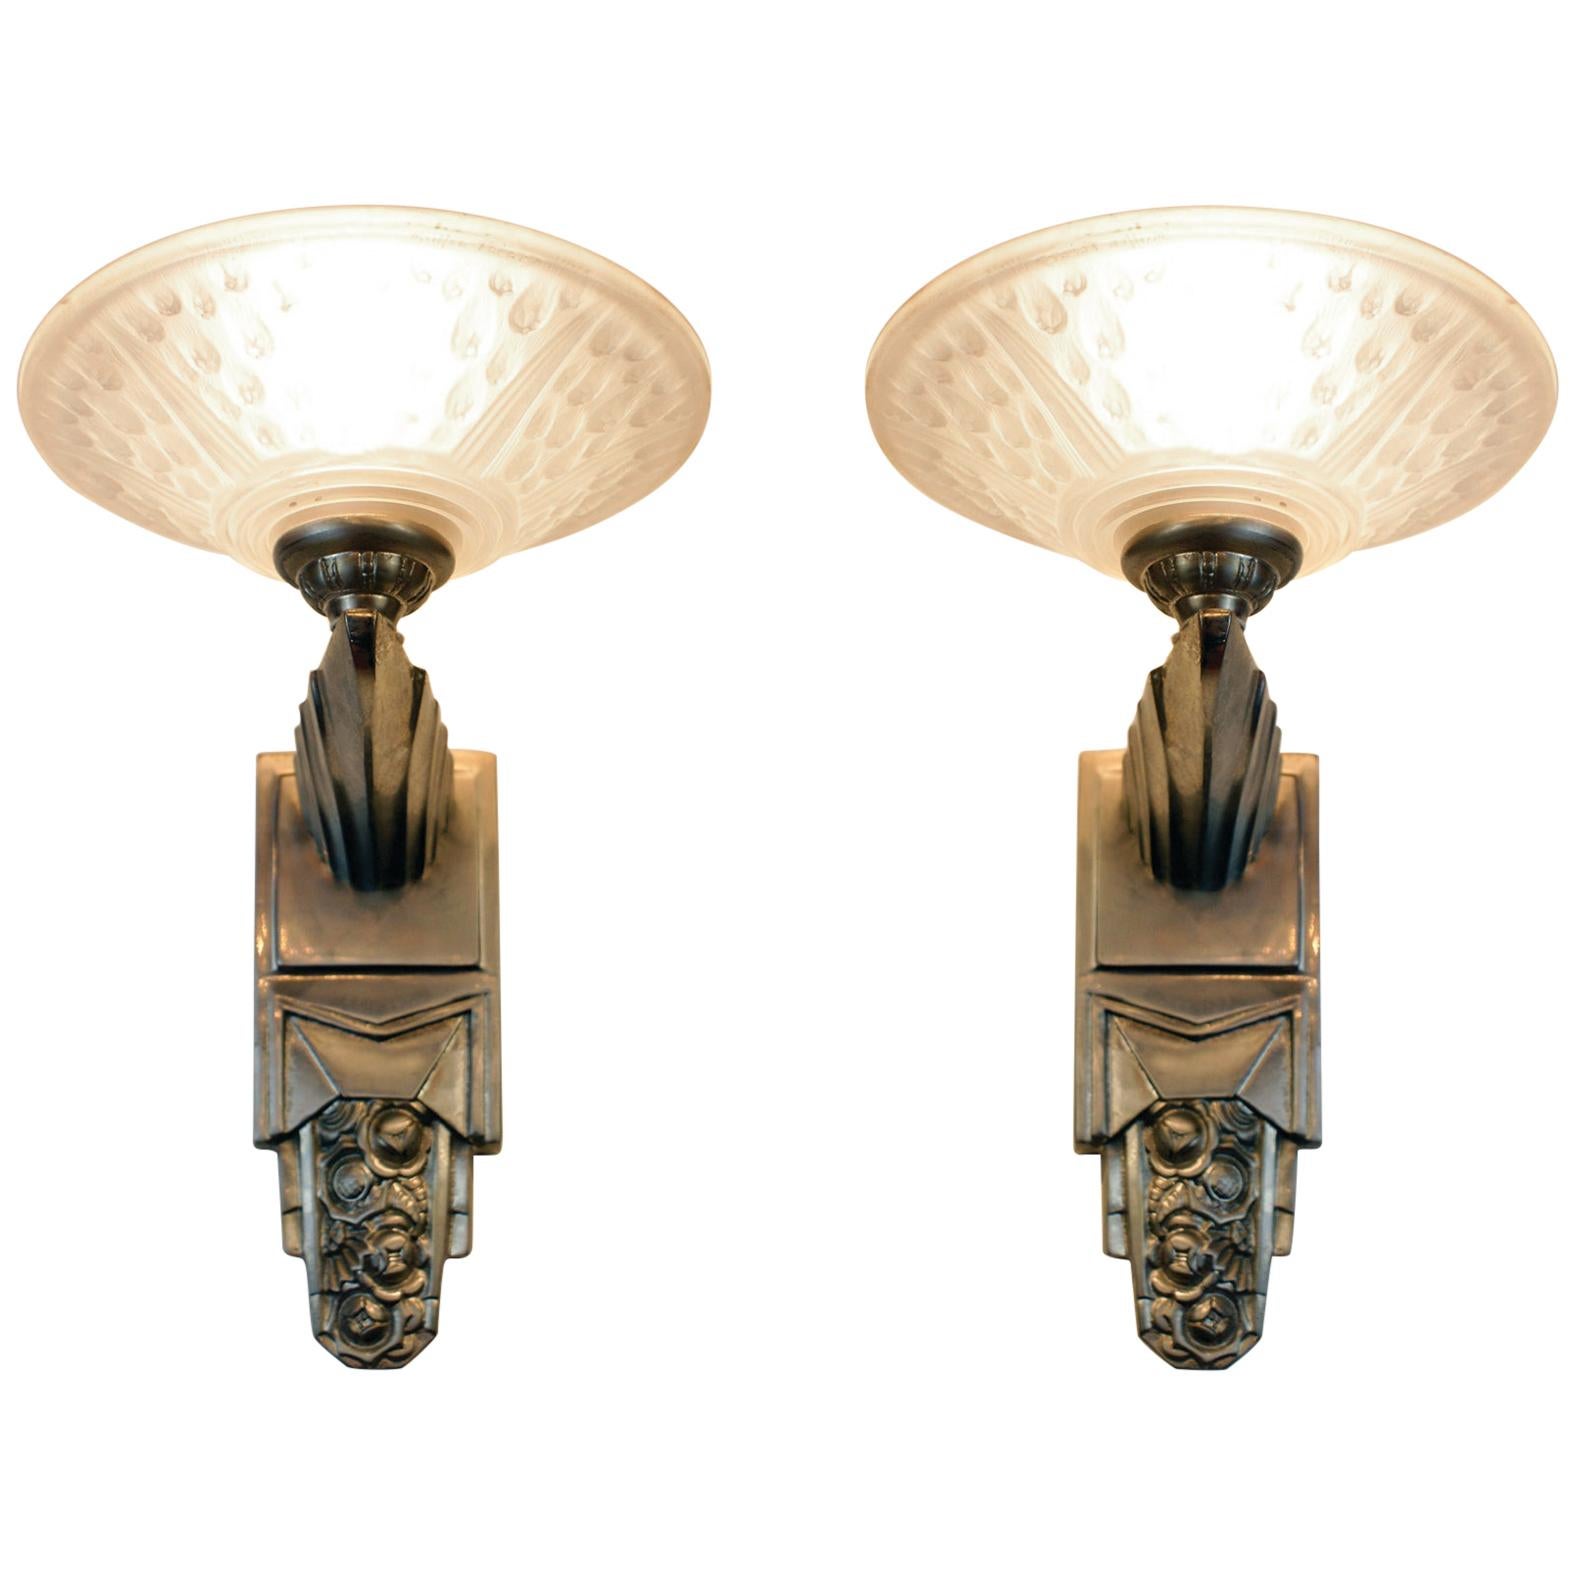 Gorgeous Pair of French Art Deco Sconces Signed Muller Frères Luneville For Sale